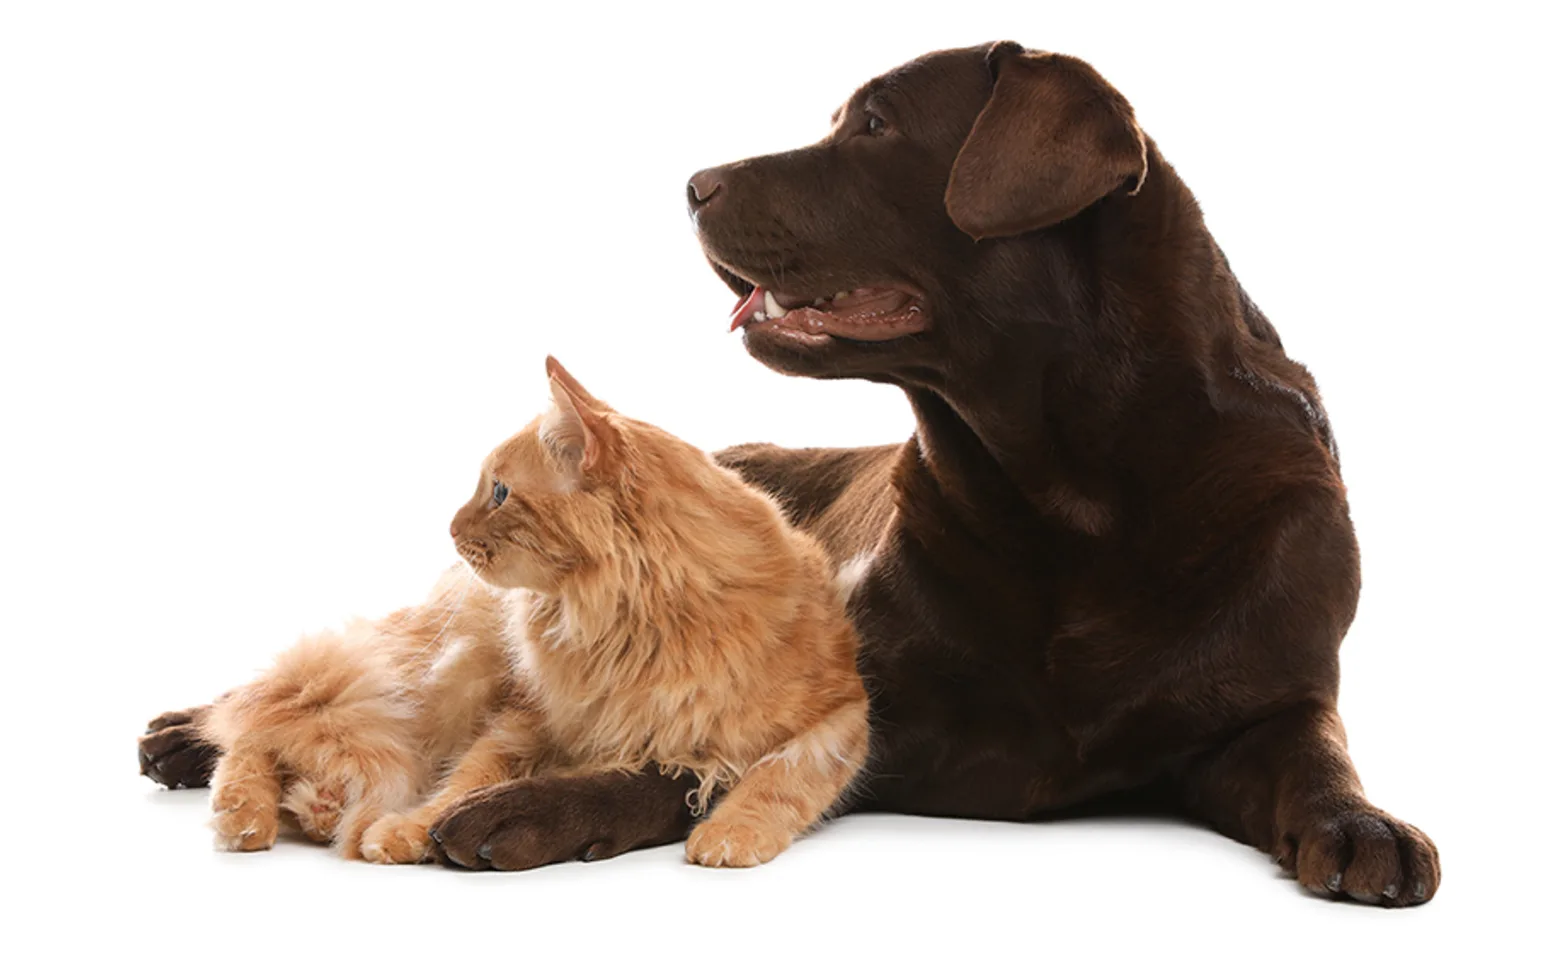 Dog and cat laying together looking to the left in white background